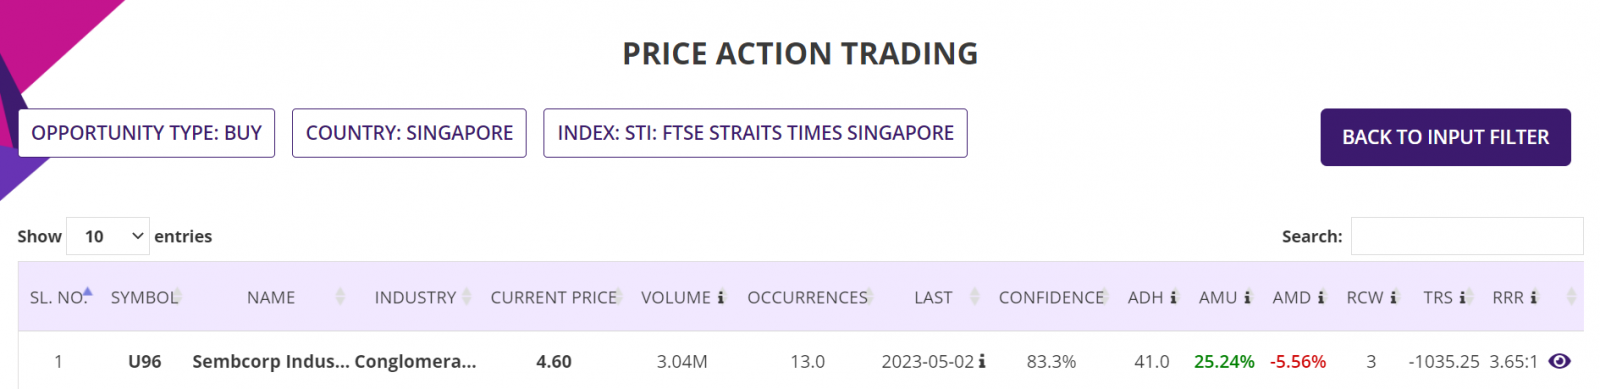 Price action trading strategy, summary report, Singapore Stocks, CFD trading